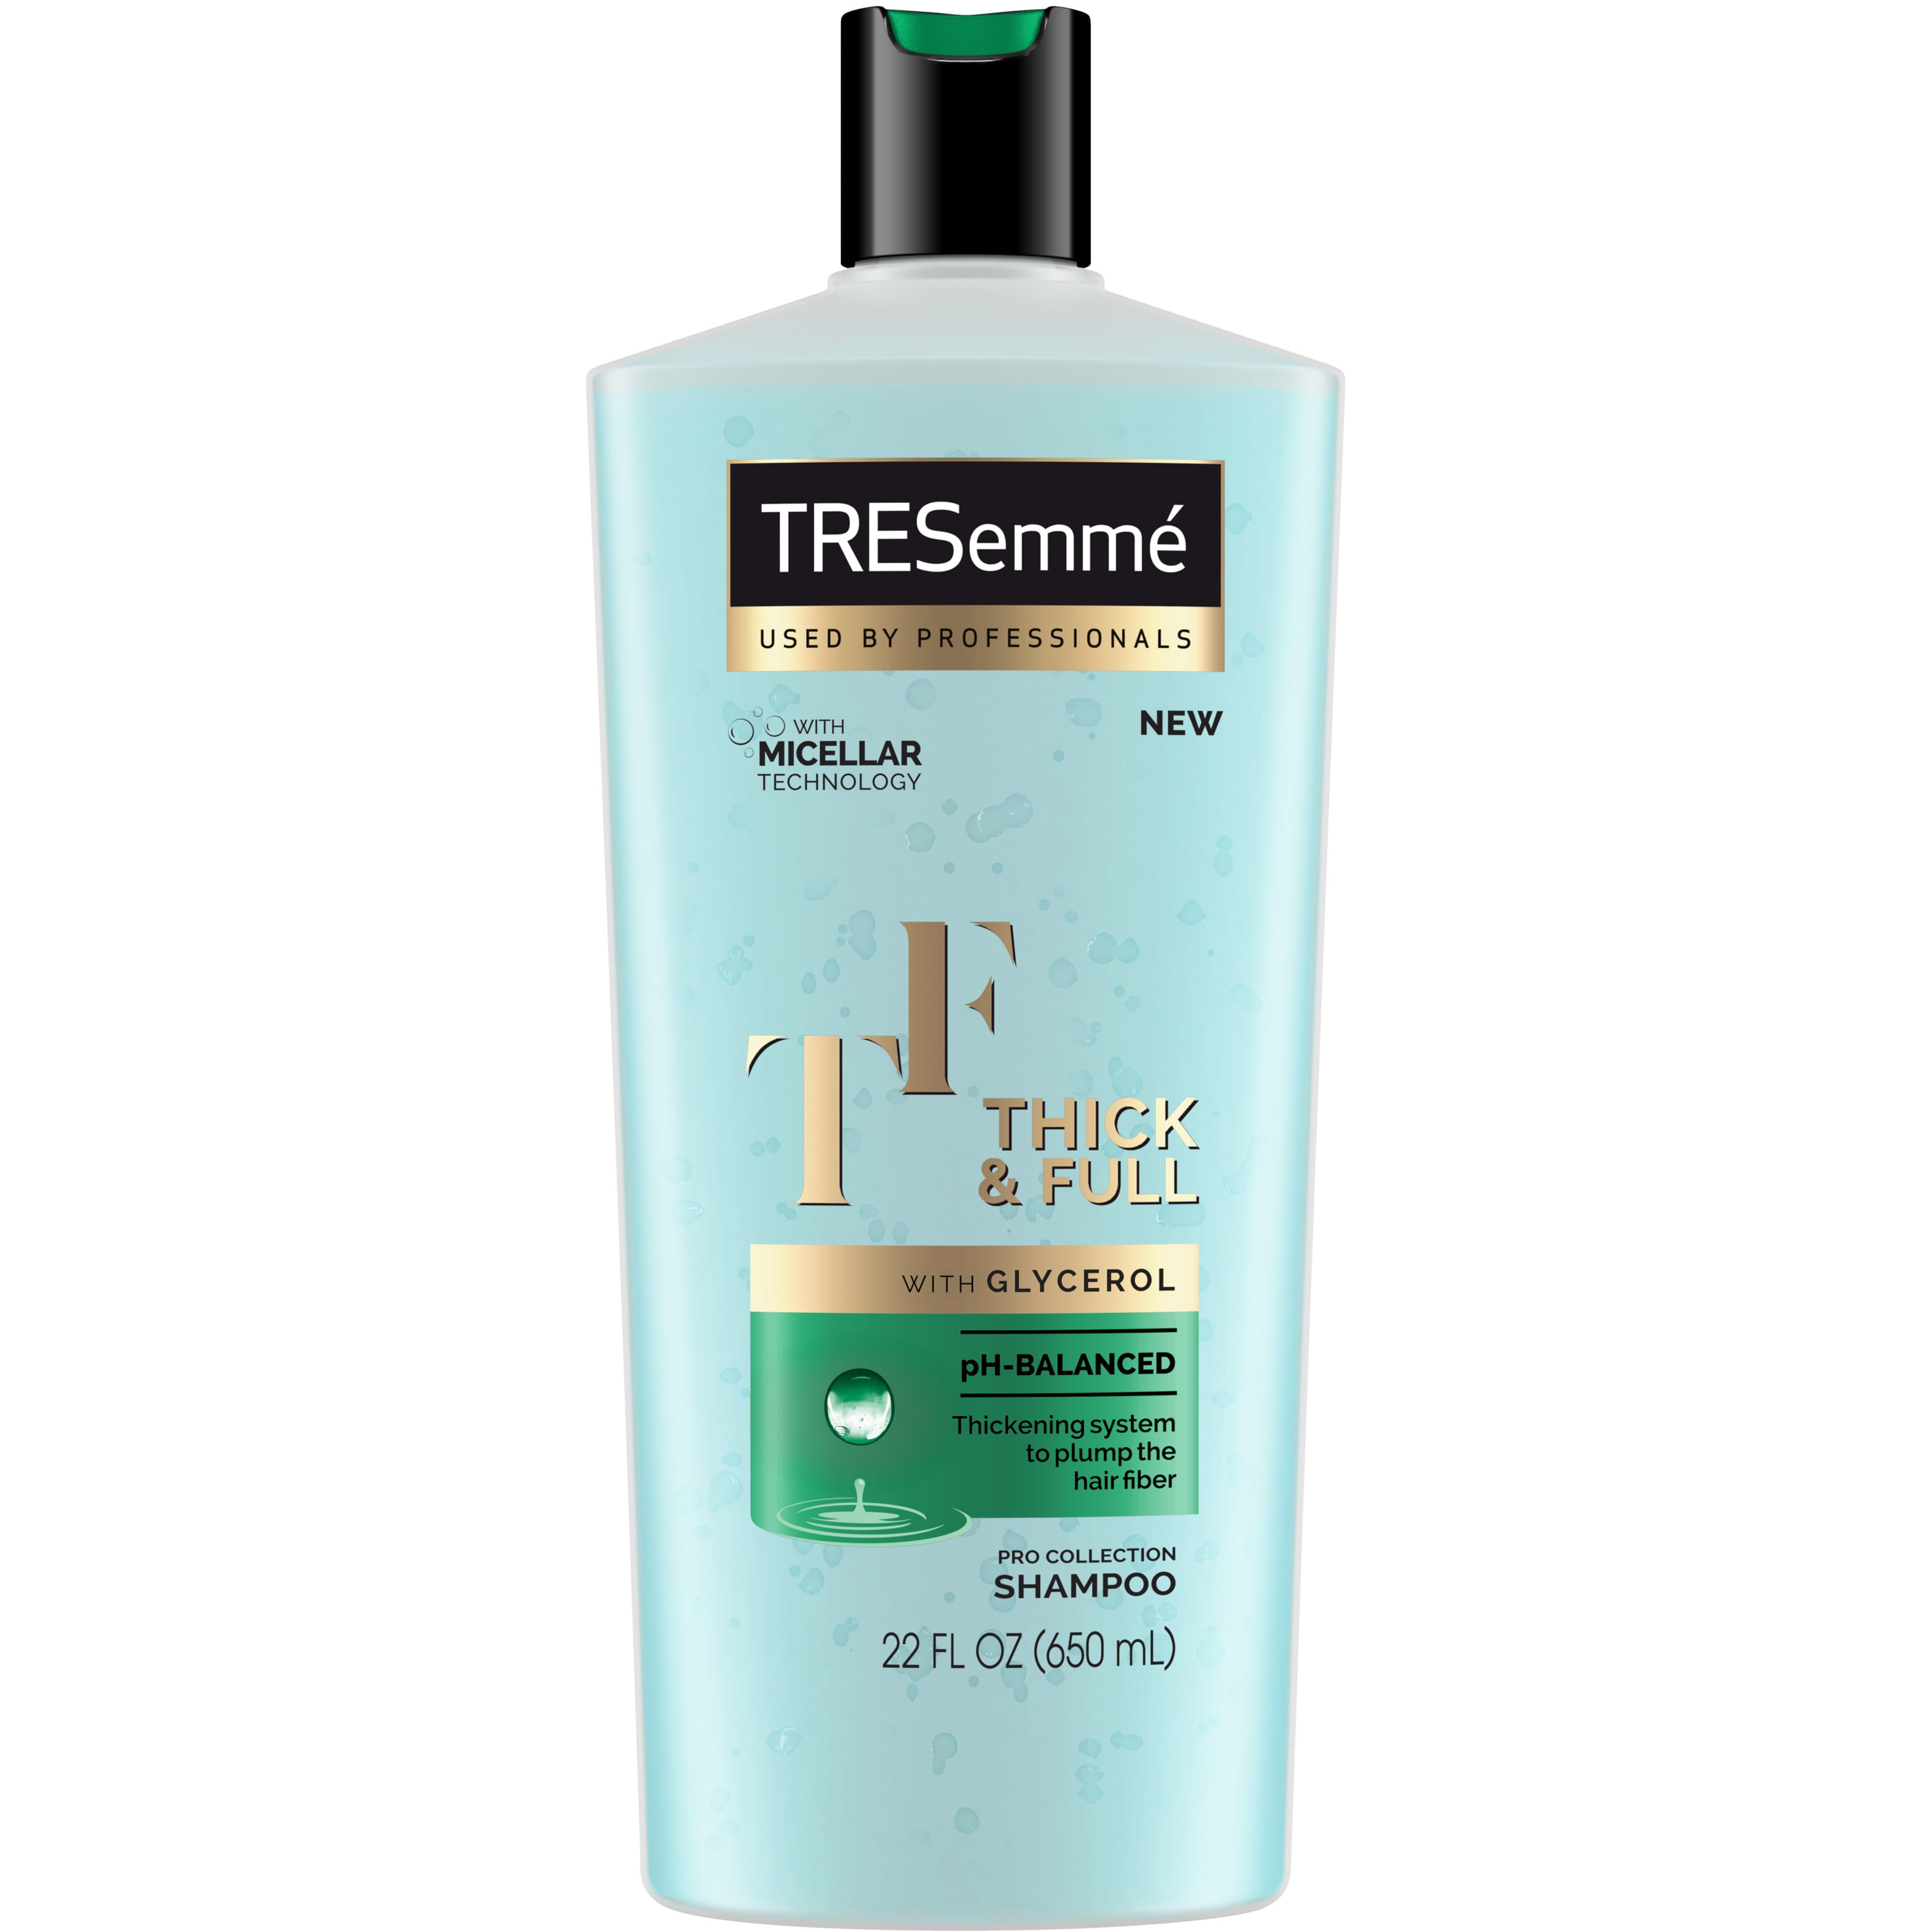 TRESemme Pro Collection Shampoo Thick & Full 22 oz 